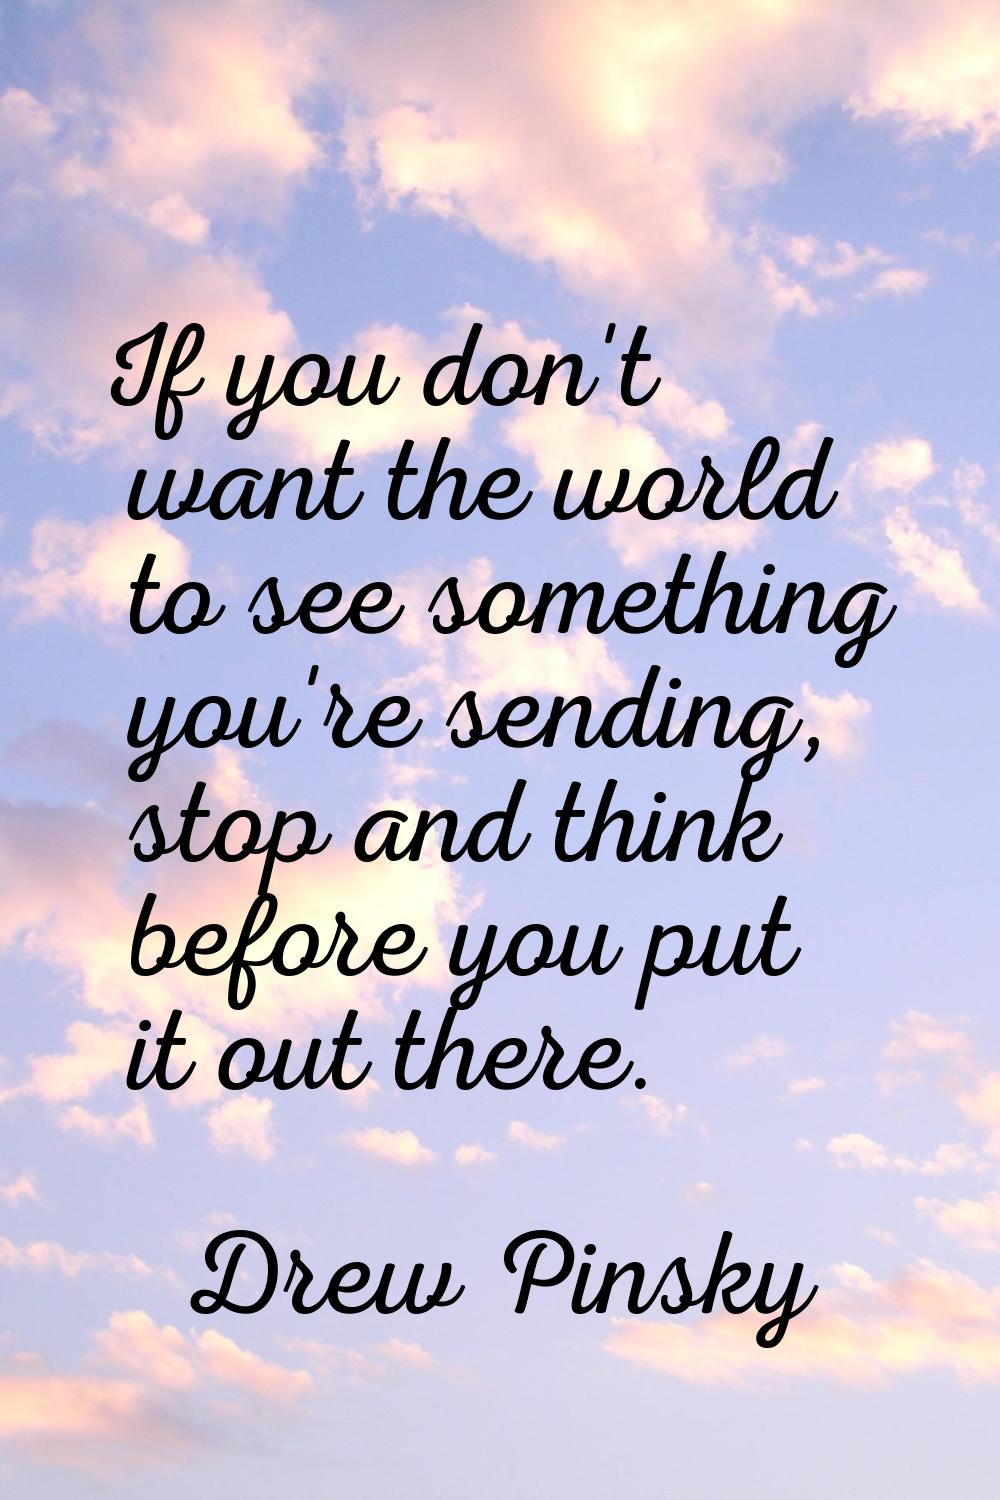 If you don't want the world to see something you're sending, stop and think before you put it out t